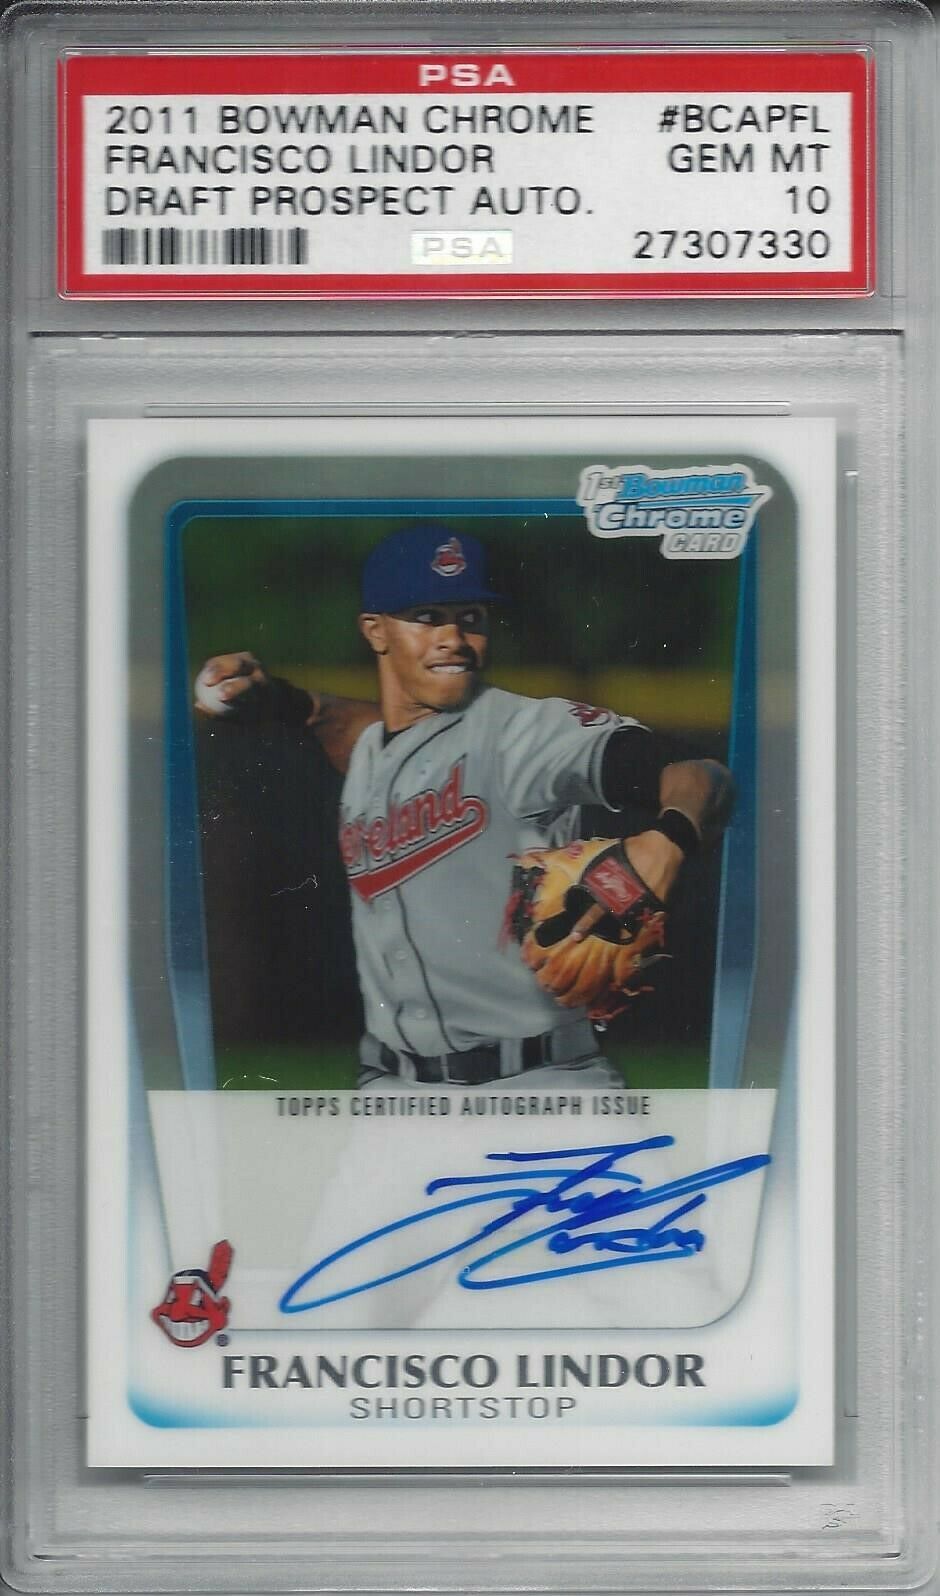 Top 50 Bowman Chrome Rookie Auto Cards in 2020 - Cardboard Picasso